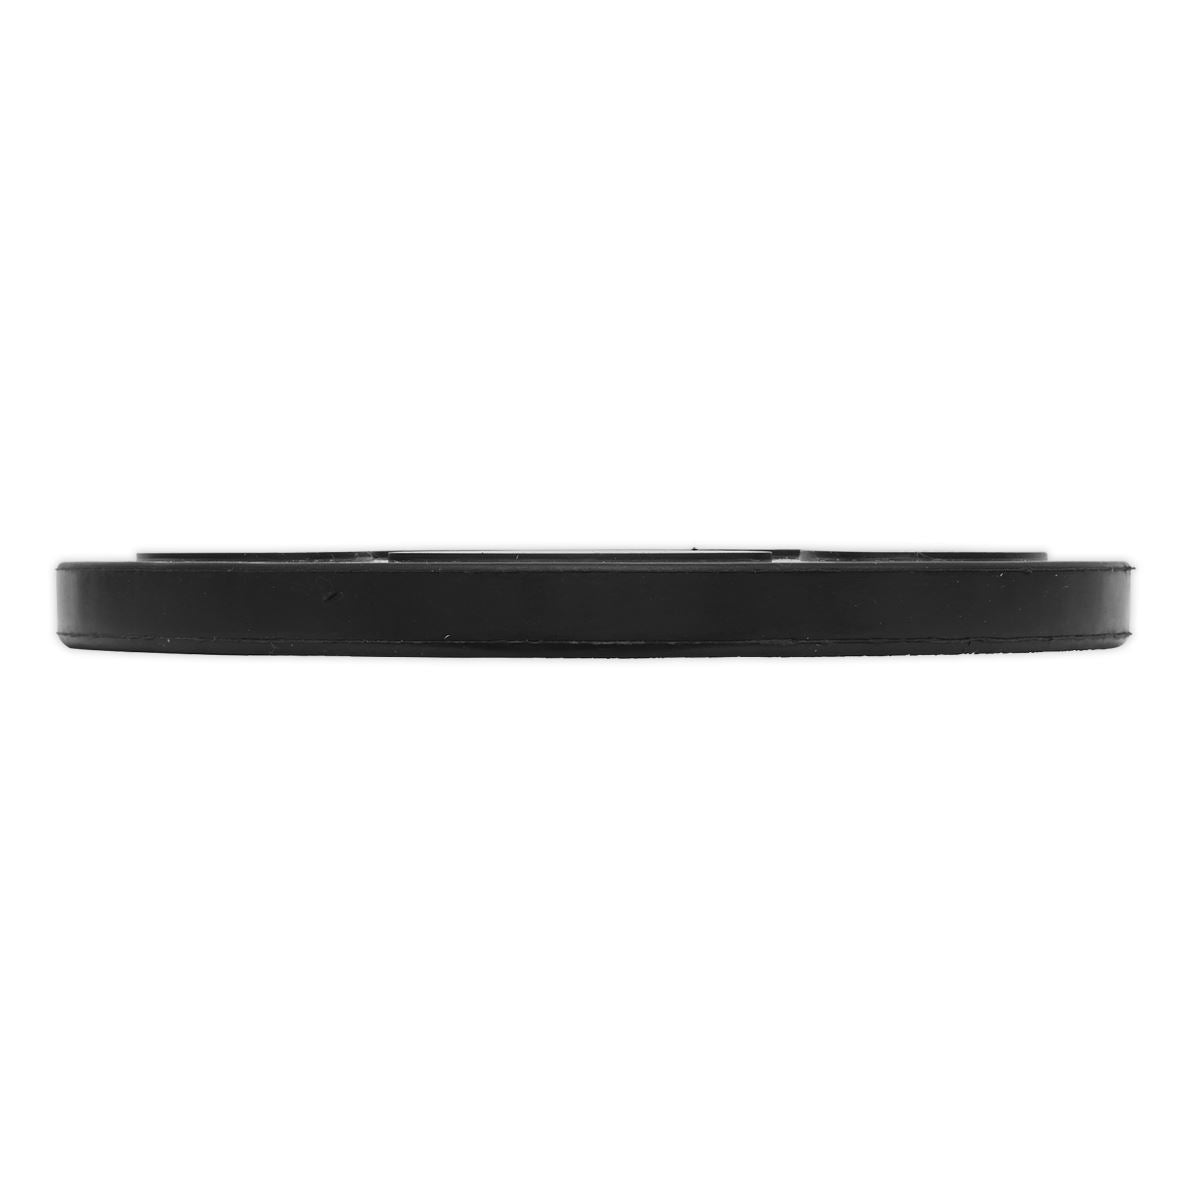 Sealey Safety Rubber Trolley Jack Pad Type B To Fit 136.5mm Saddle